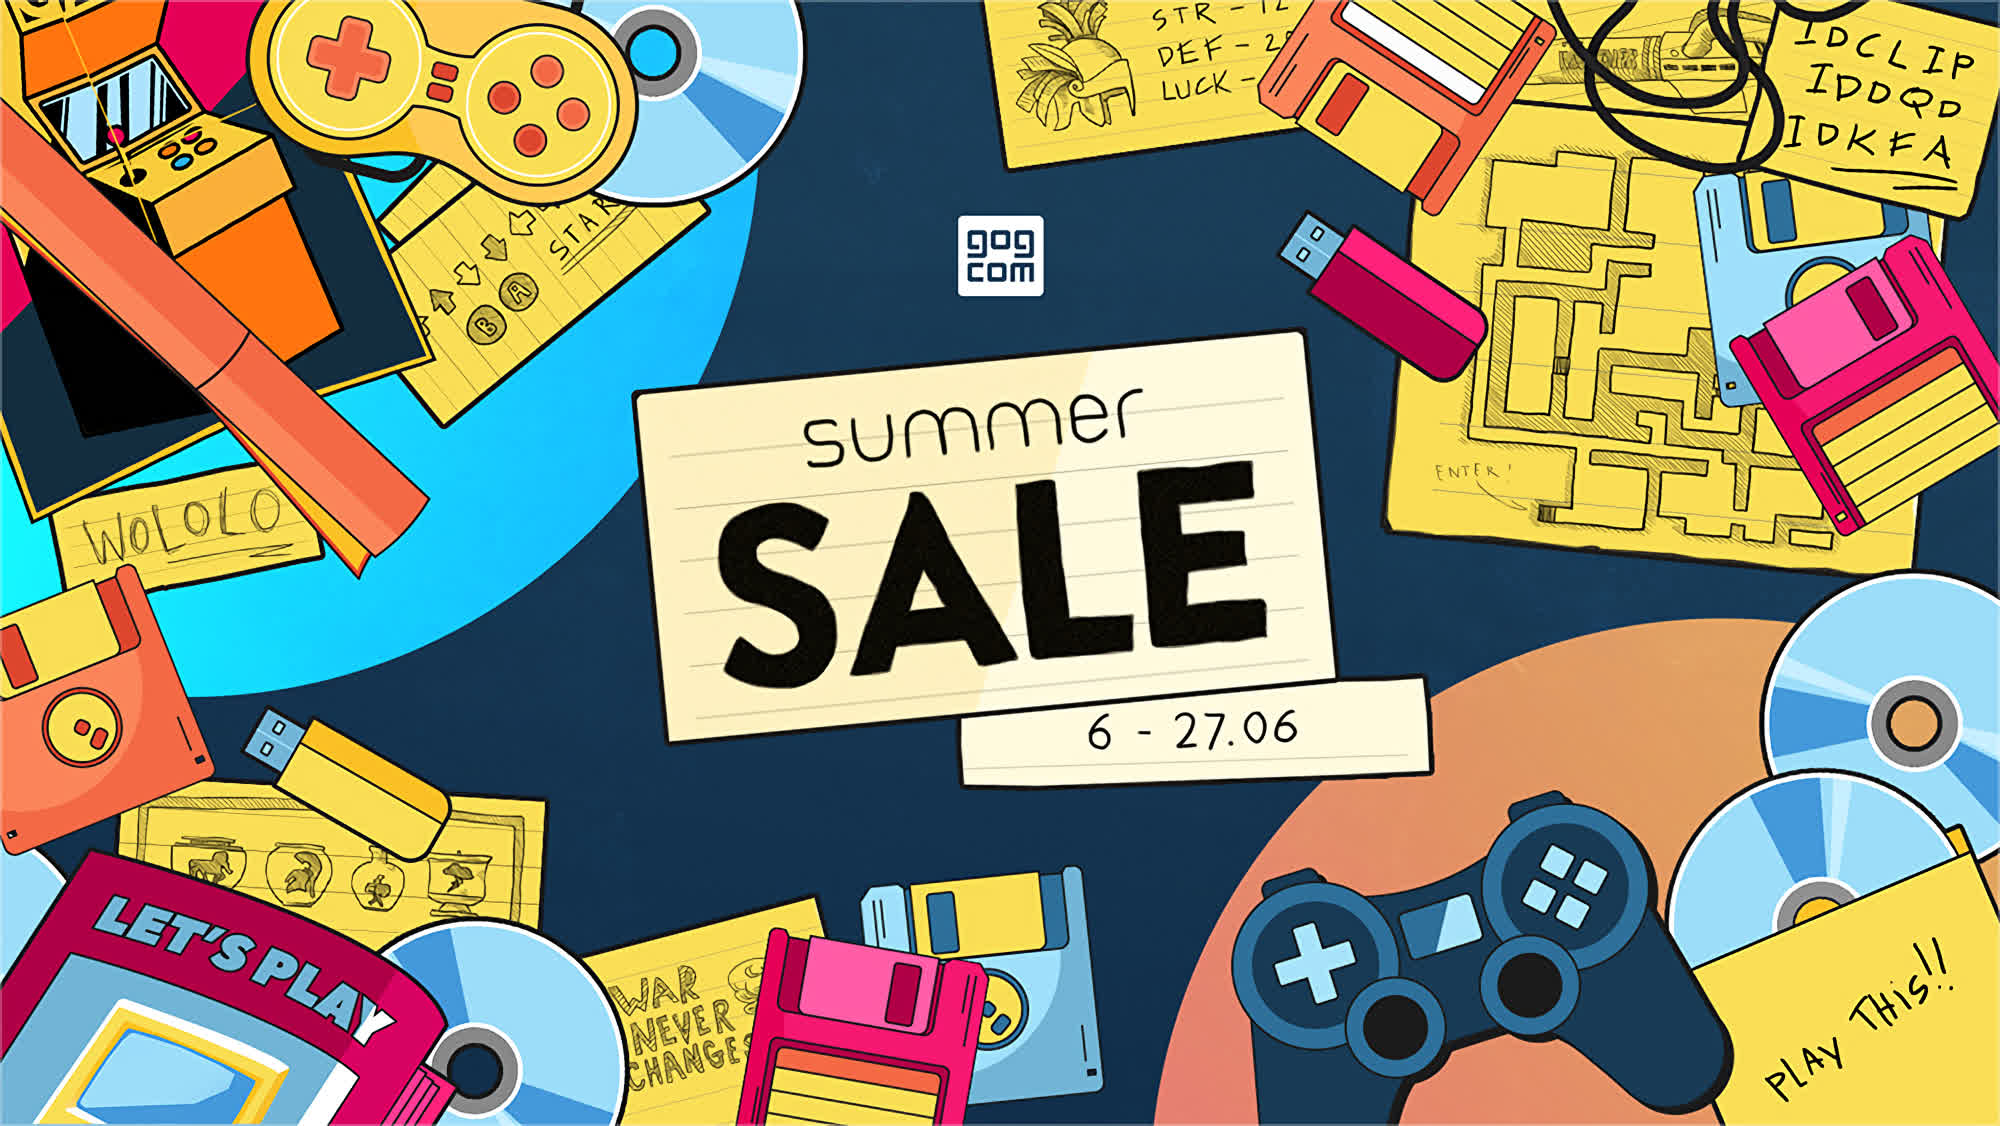 GOG summer sale goes live with more than 3,500 deals